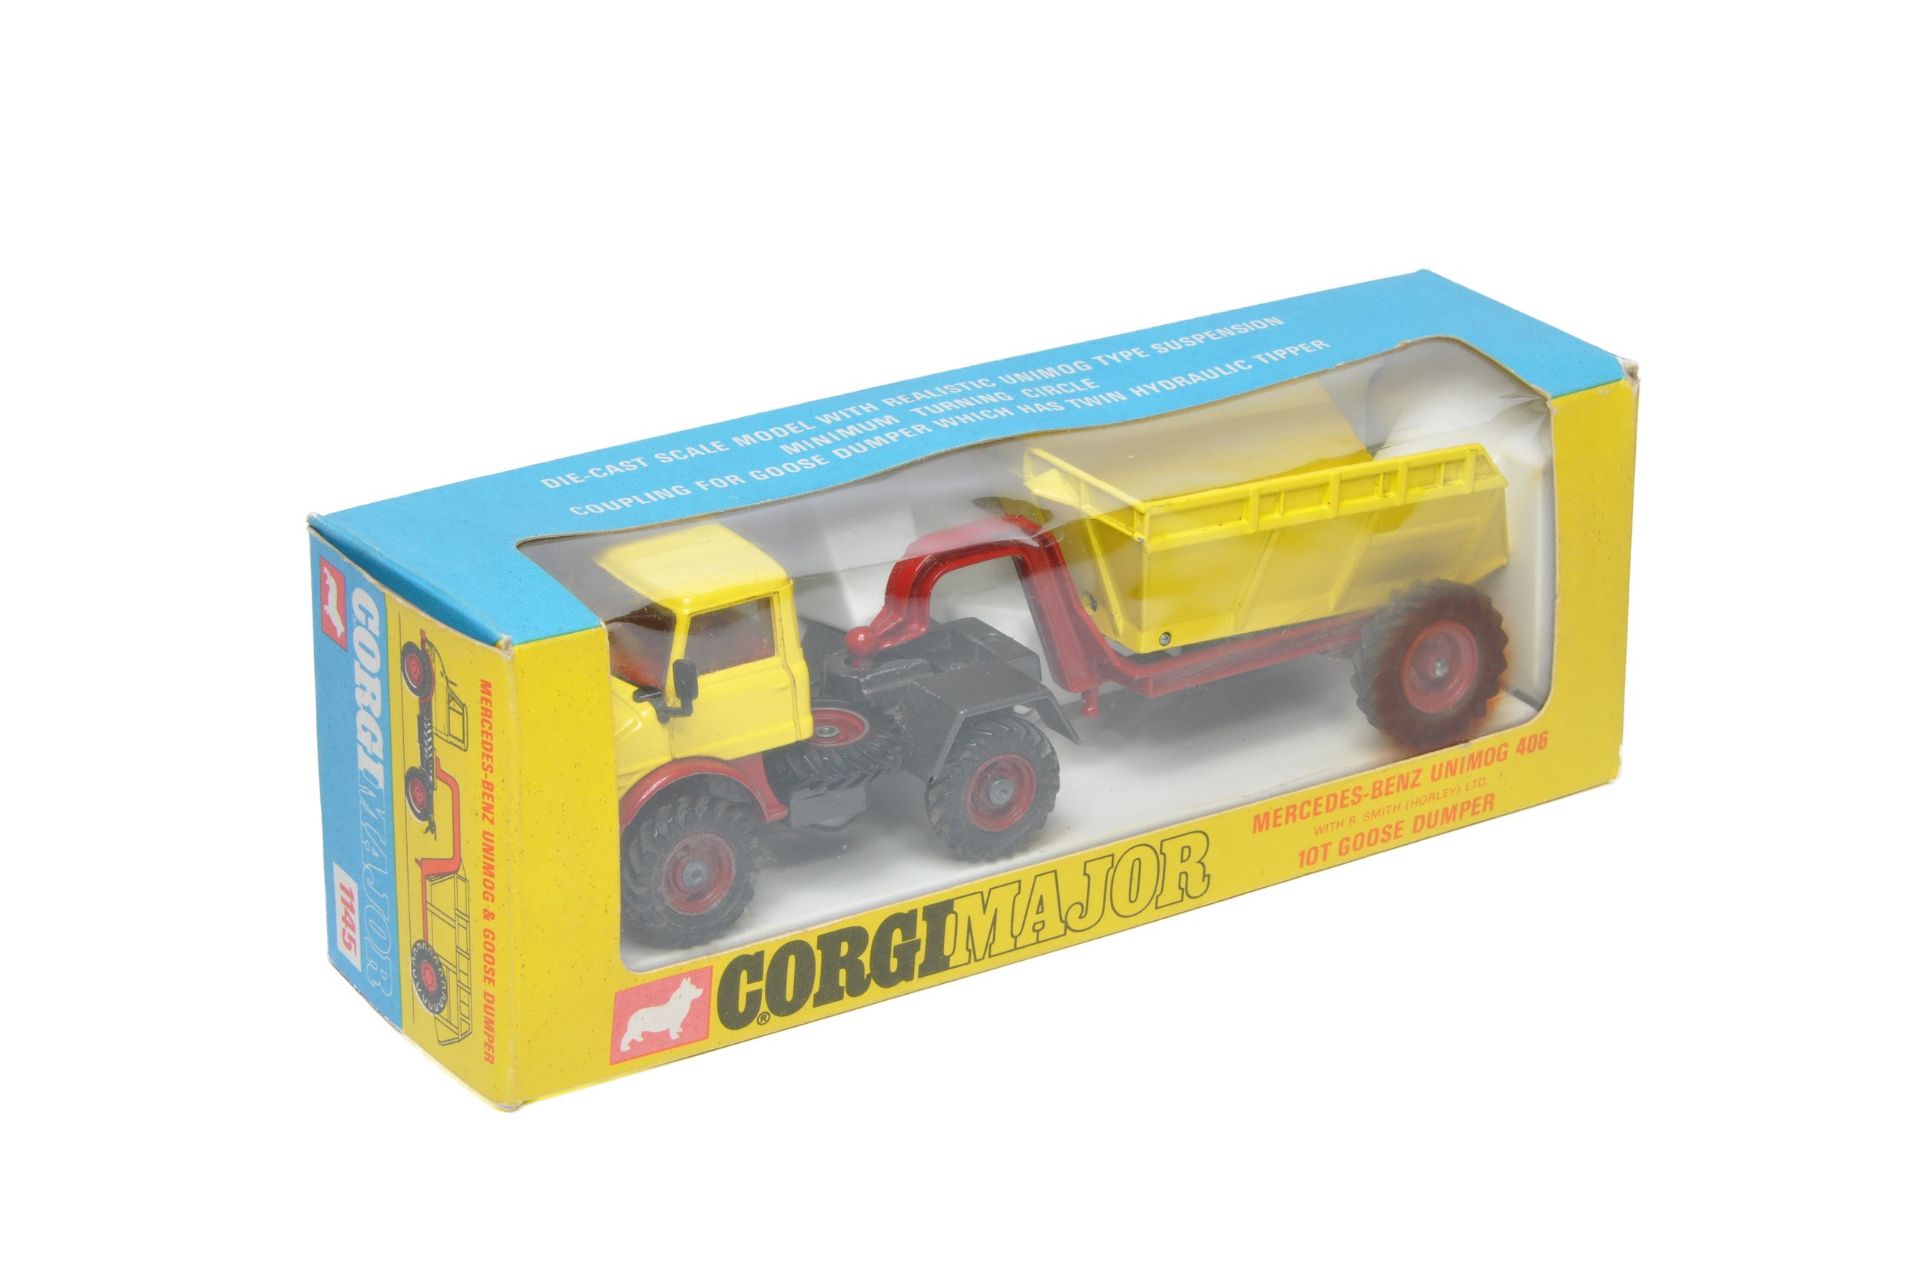 Corgi No. 1145 Major Pack Mercedes Benz Unimog 406 with Goose Trailer. Yellow, maroon, red interior. - Image 2 of 3